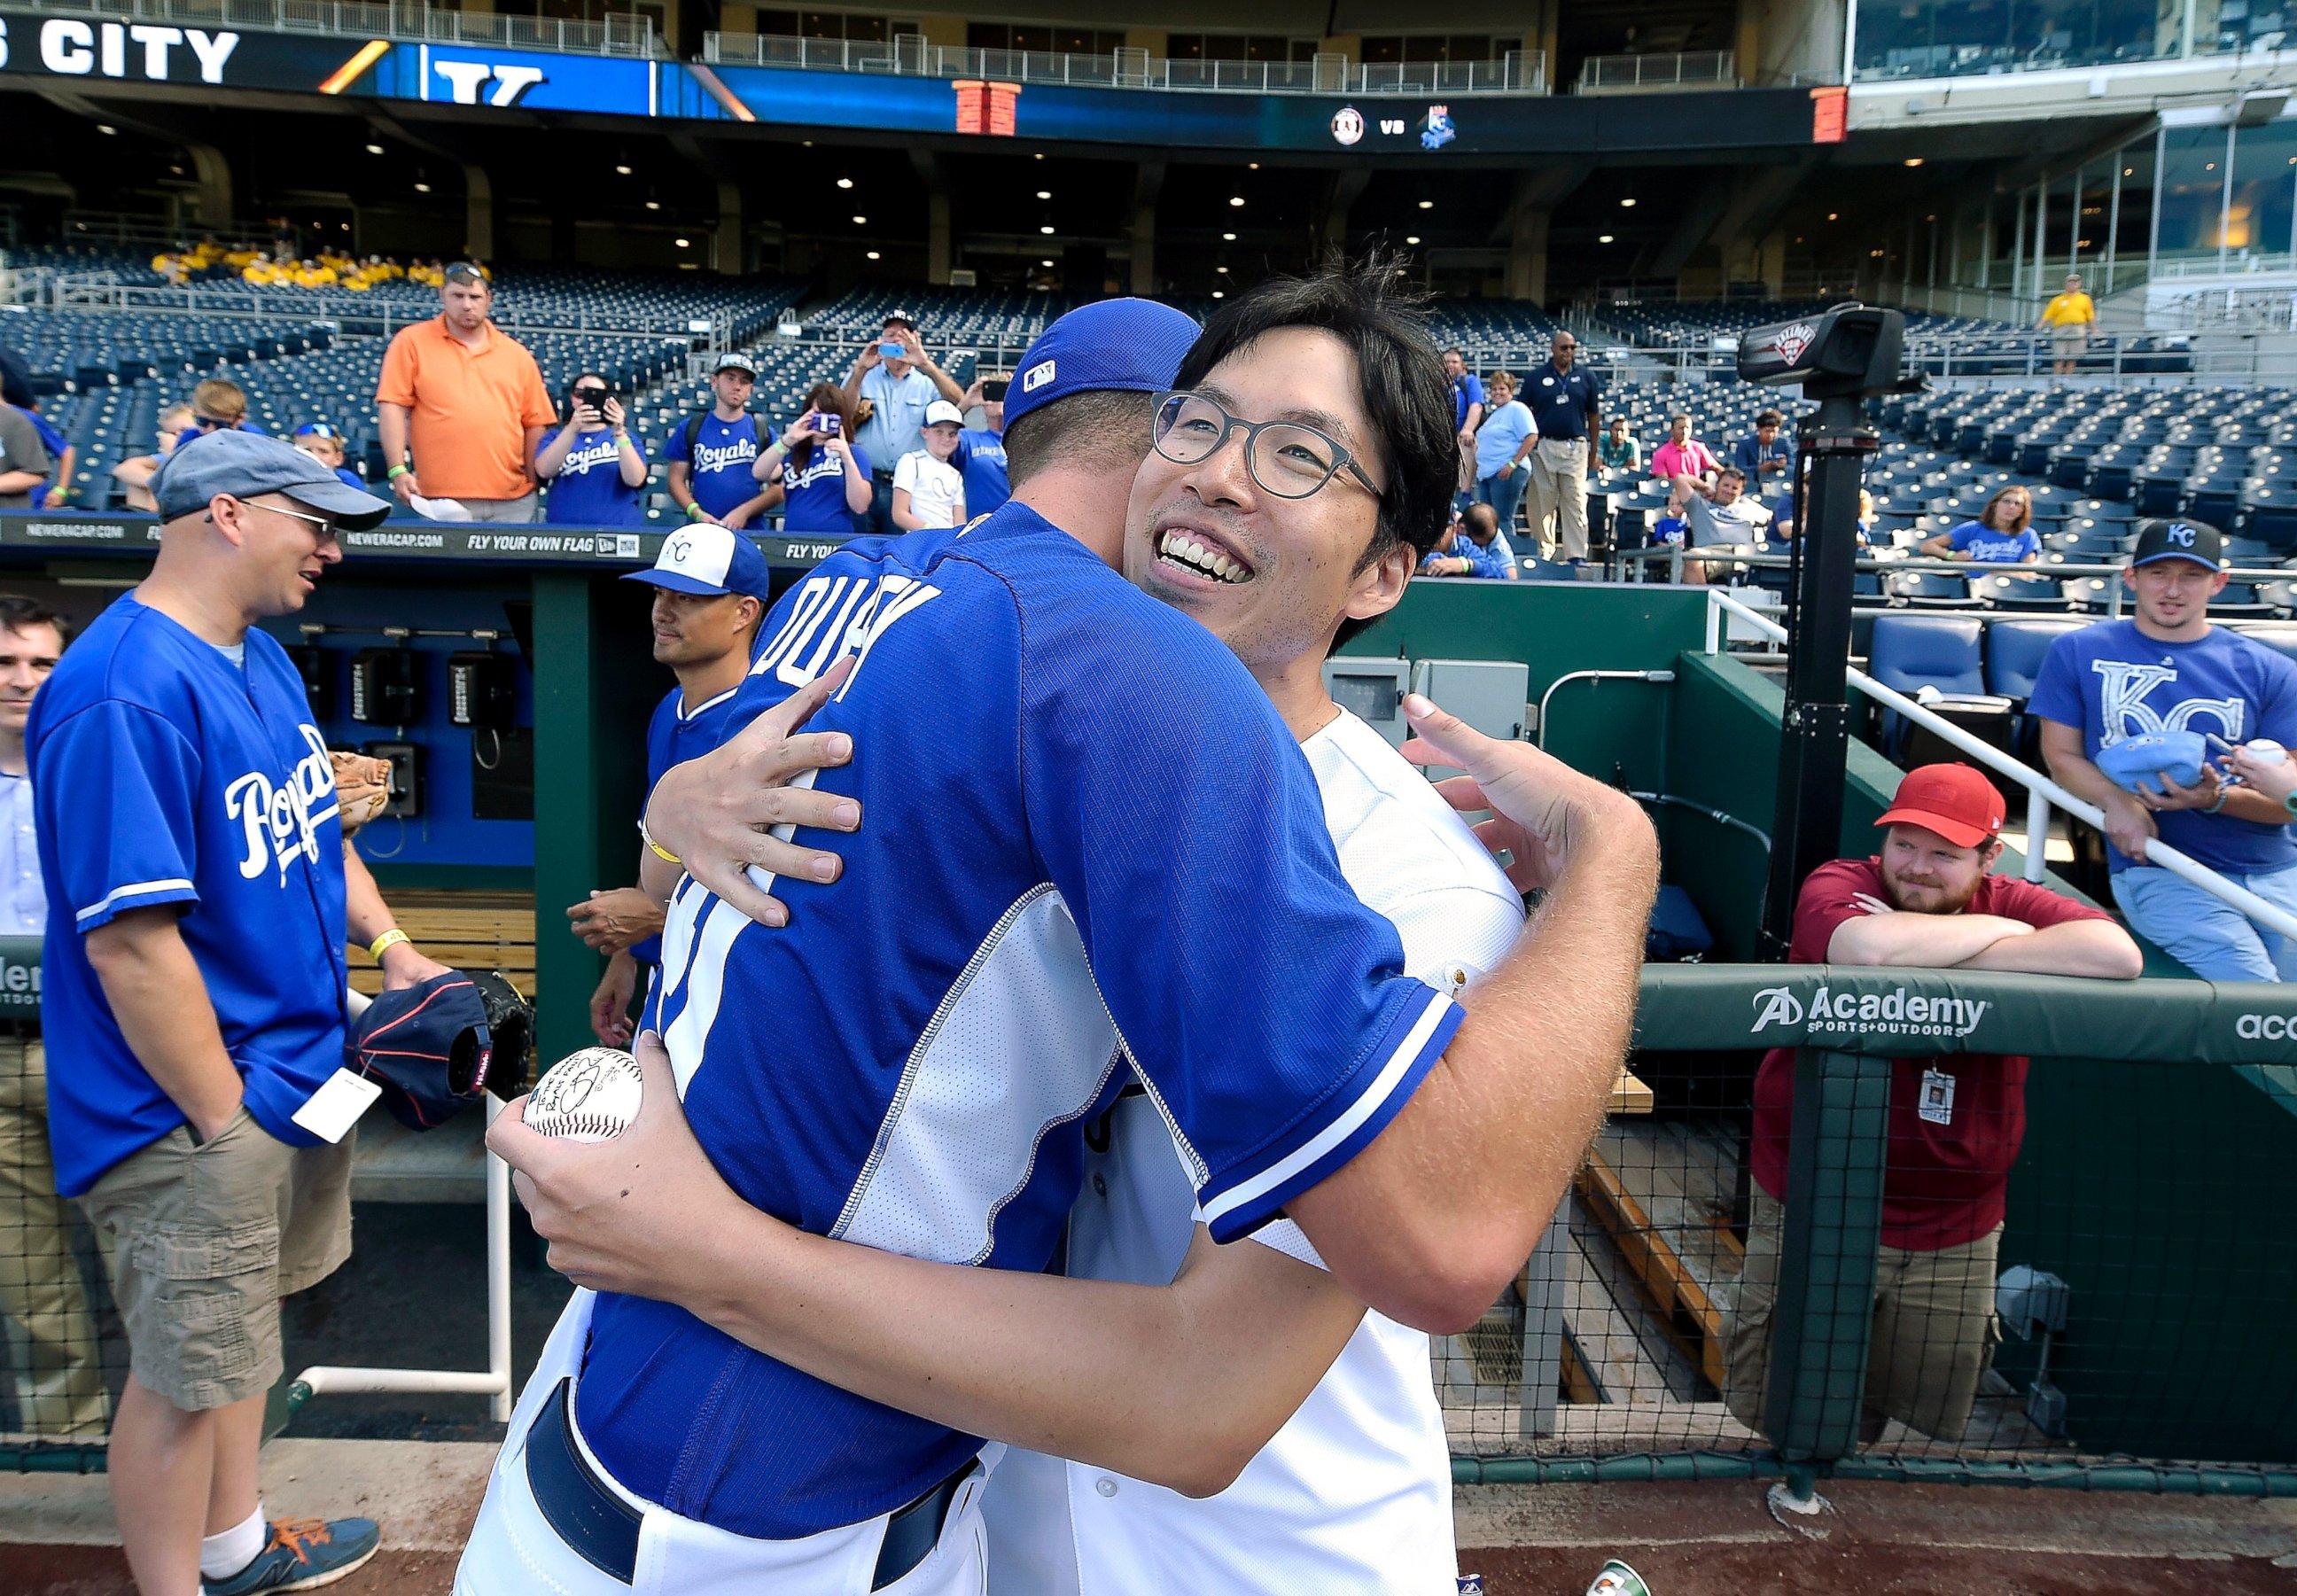 PHOTO: Kansas City Royals fan Sungwoo Lee, from South Korea, hugs Royals pitcher Danny Duffy after meeting before the team's game against the Oakland Athletics, Aug. 11, 2014, at Kauffman Stadium in Kansas City, Mo.